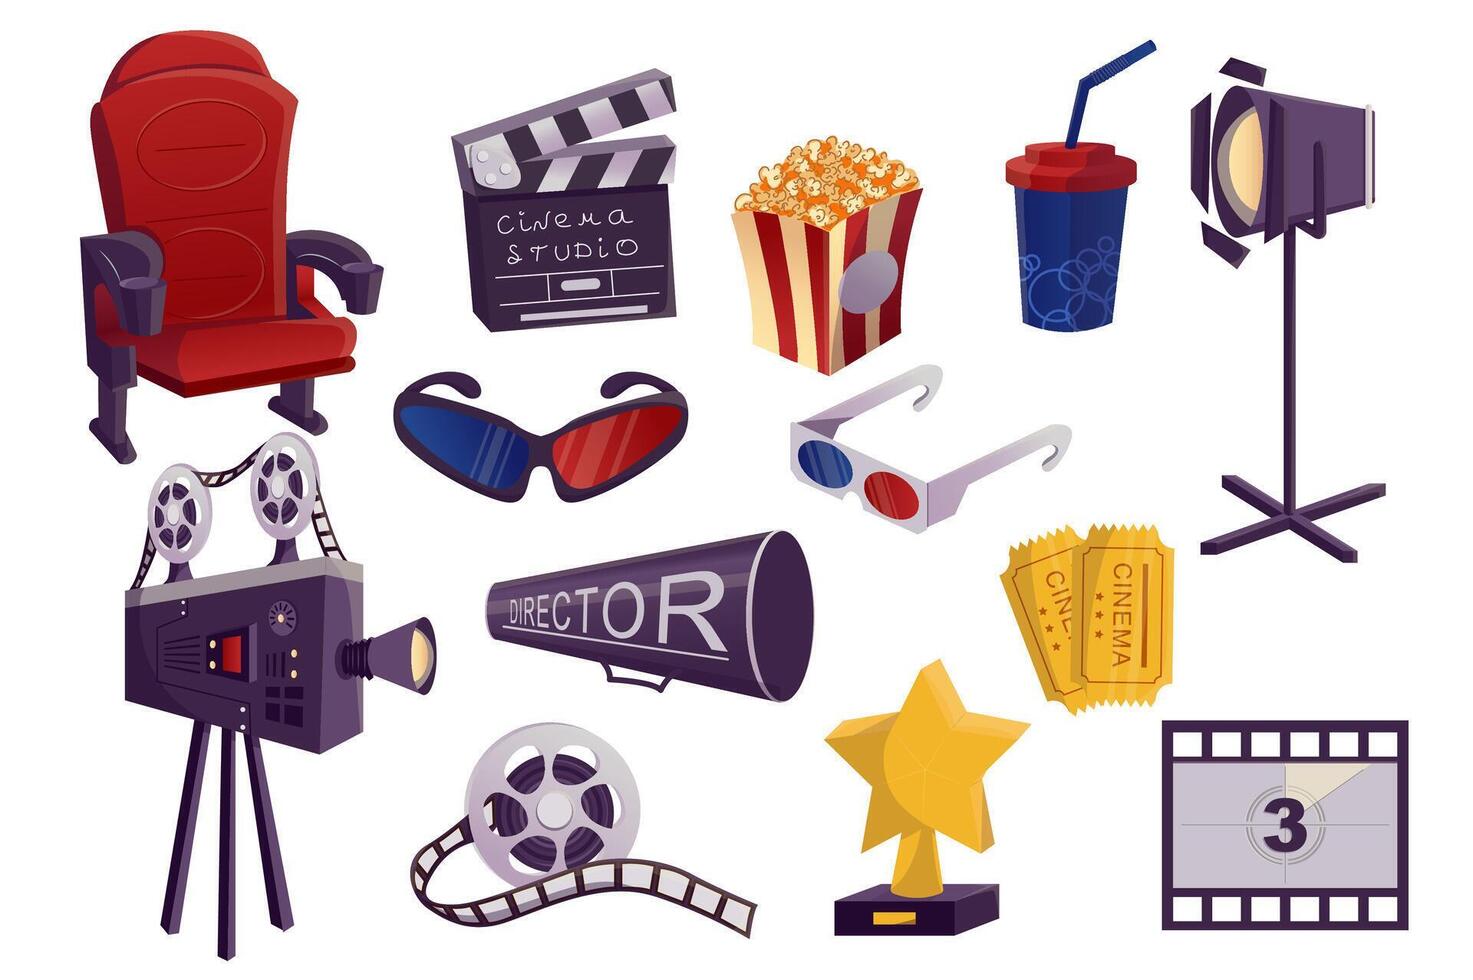 Cinema industry mega set in flat design. Bundle elements of chair, clapperboard, popcorn, spotlight, camera, 3d glasses, tickets, film reel and other. Vector illustration isolated graphic objects